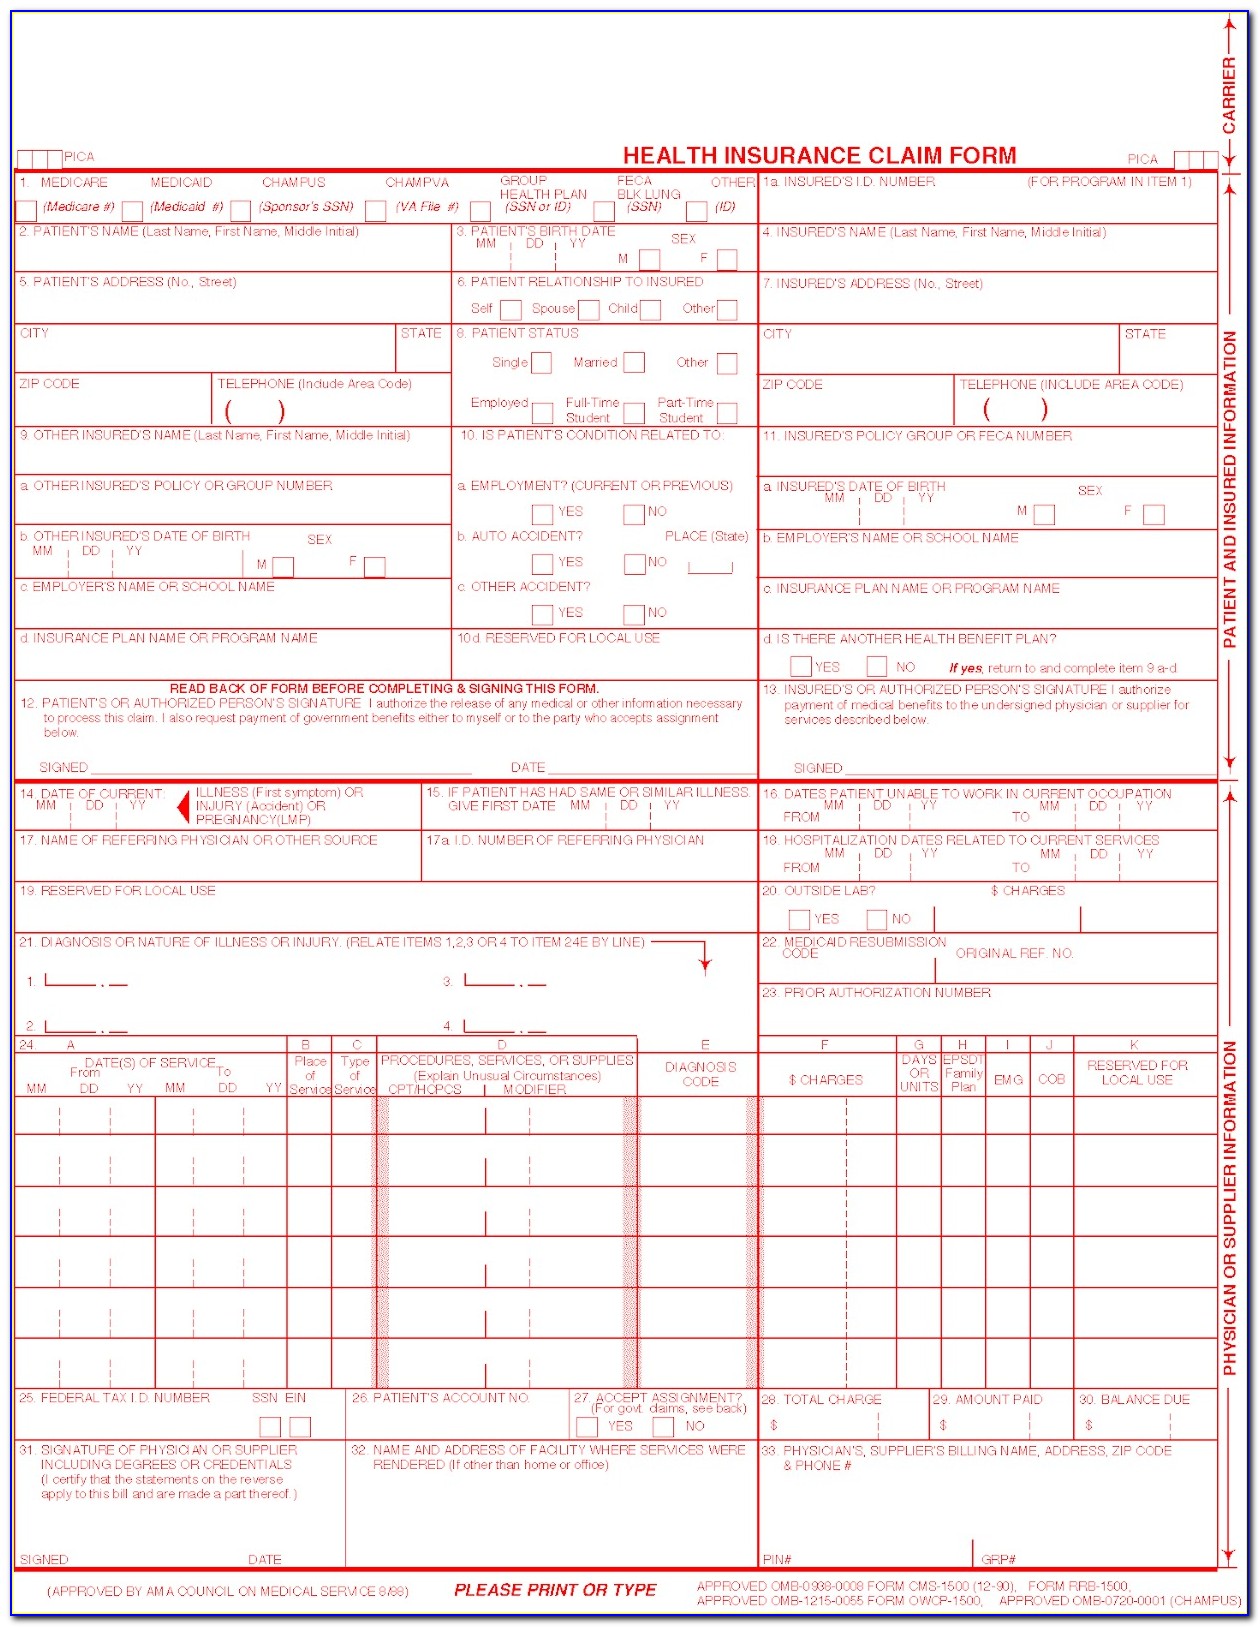 How To Fill Cms 1500 Forms